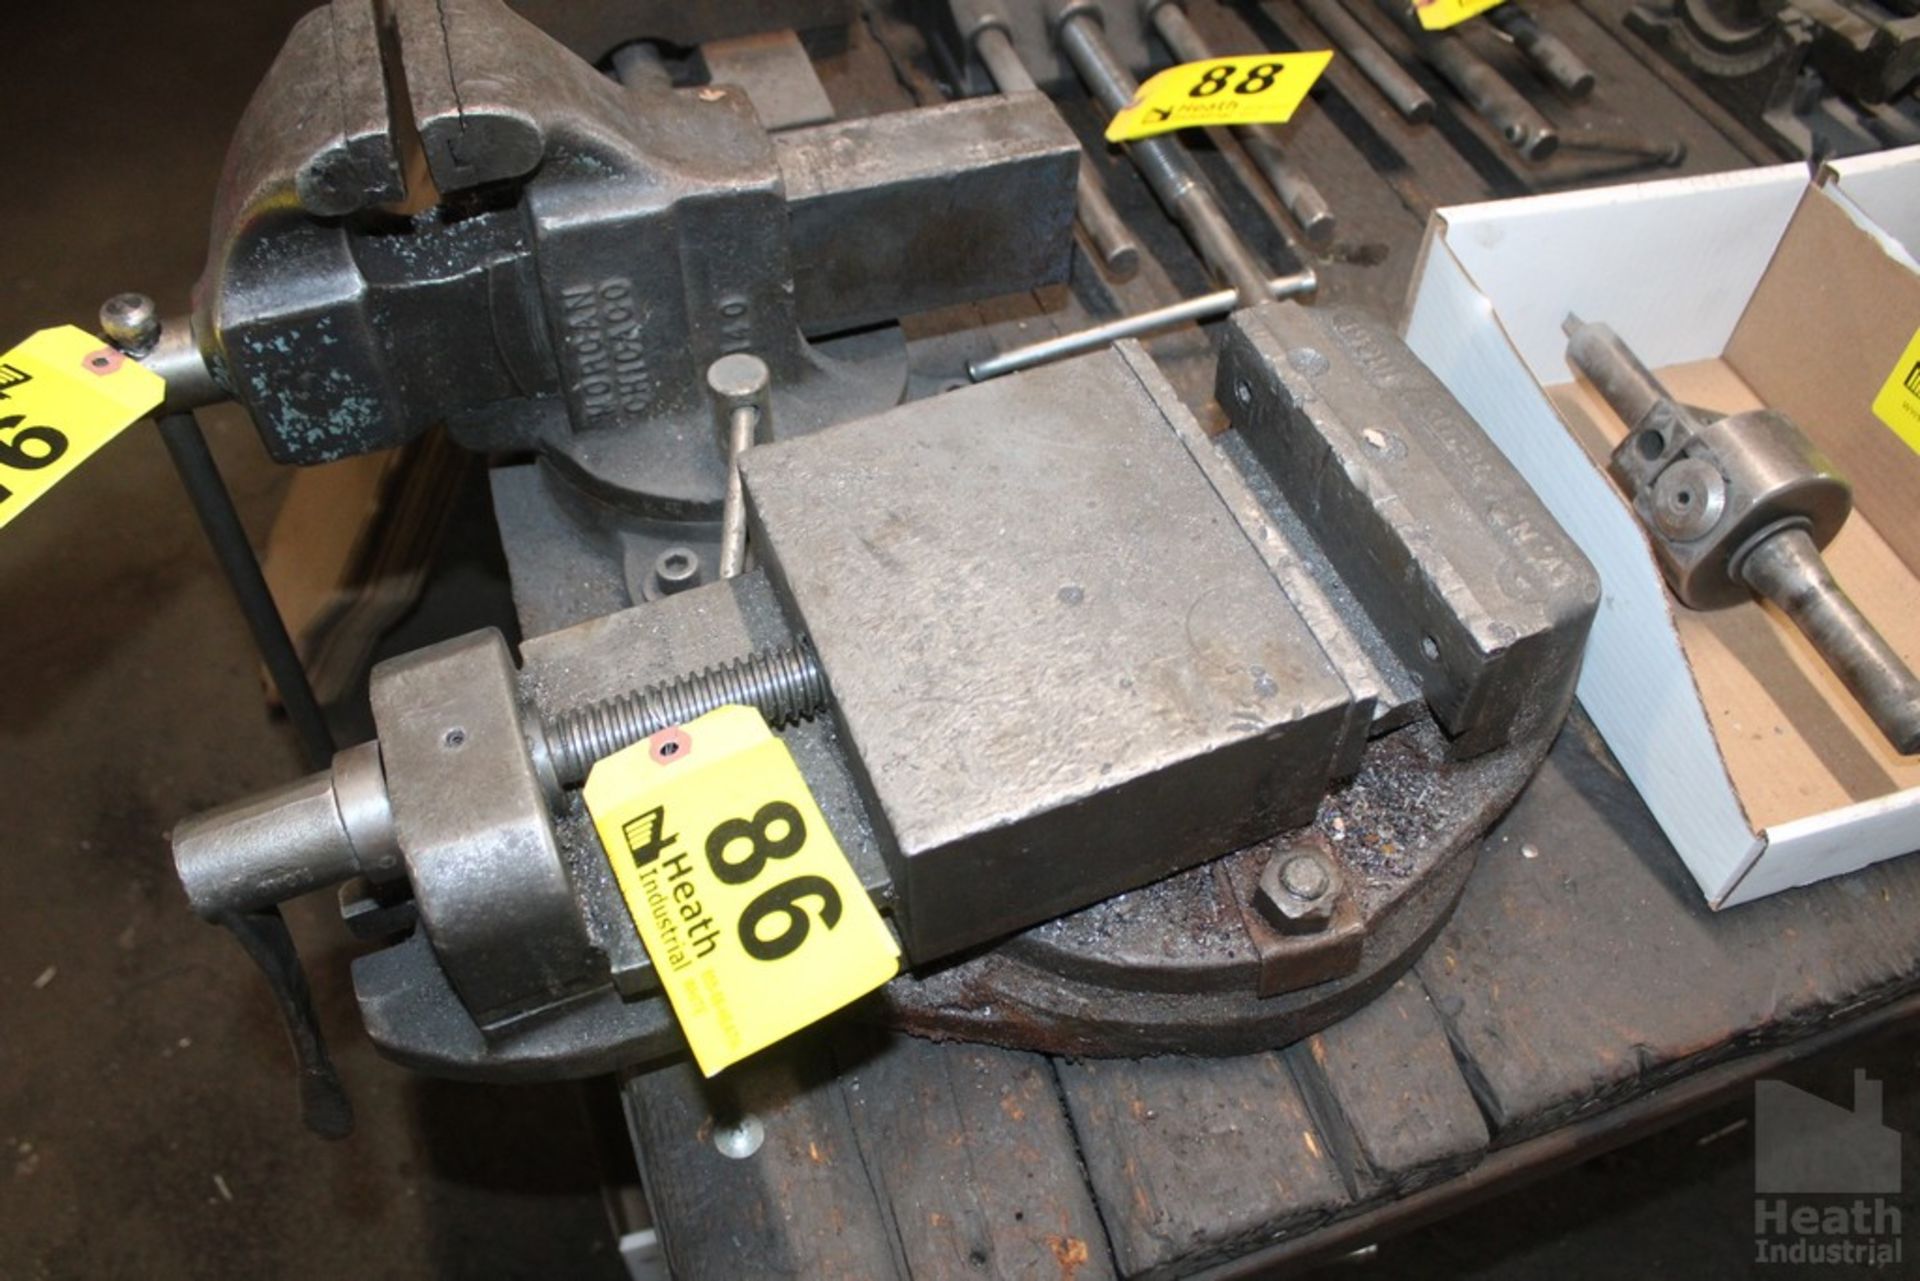 VN 7" MACHINE VISE WITH ROTARY BASE